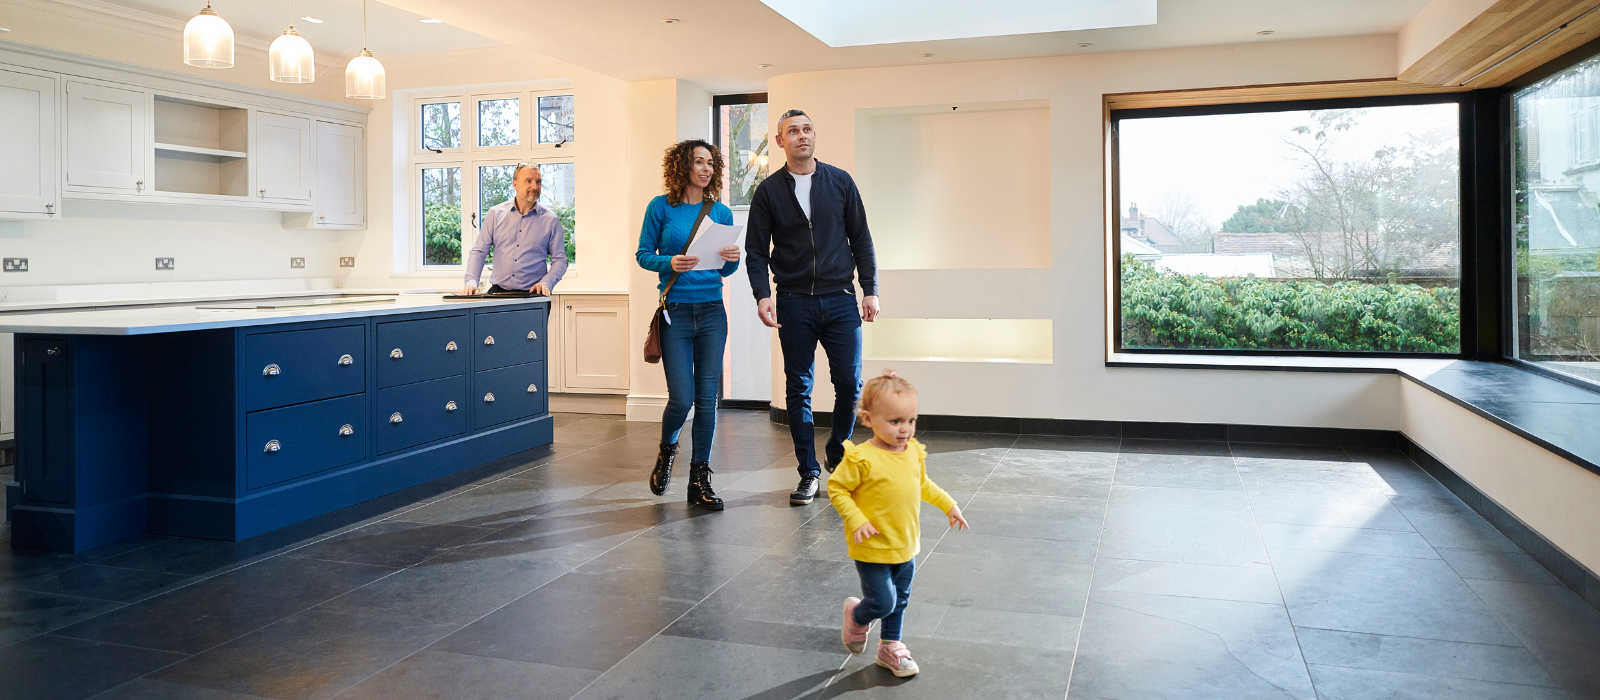 Should You Take Your Kids to Property Viewings?